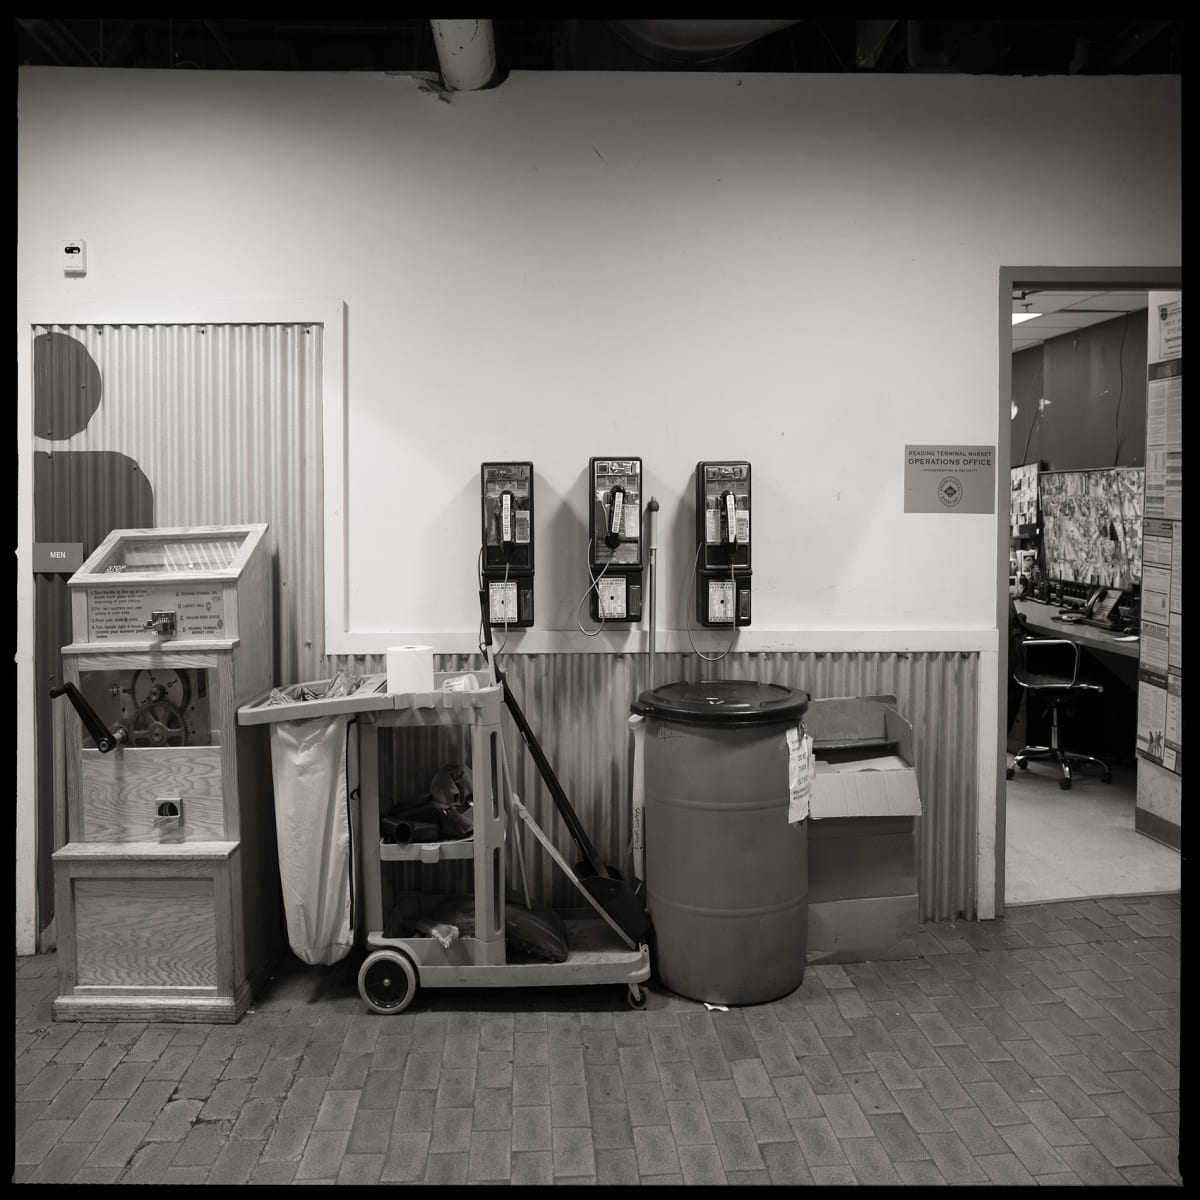 Unknown Numbers- Reading Terminal Market, Philadelphia, PA by Eric T. Kunsman  Image: ID: A black and white image shows three pay phones mounted on a wall.  In front of the payphones are trash cans and a cleaning cart.  